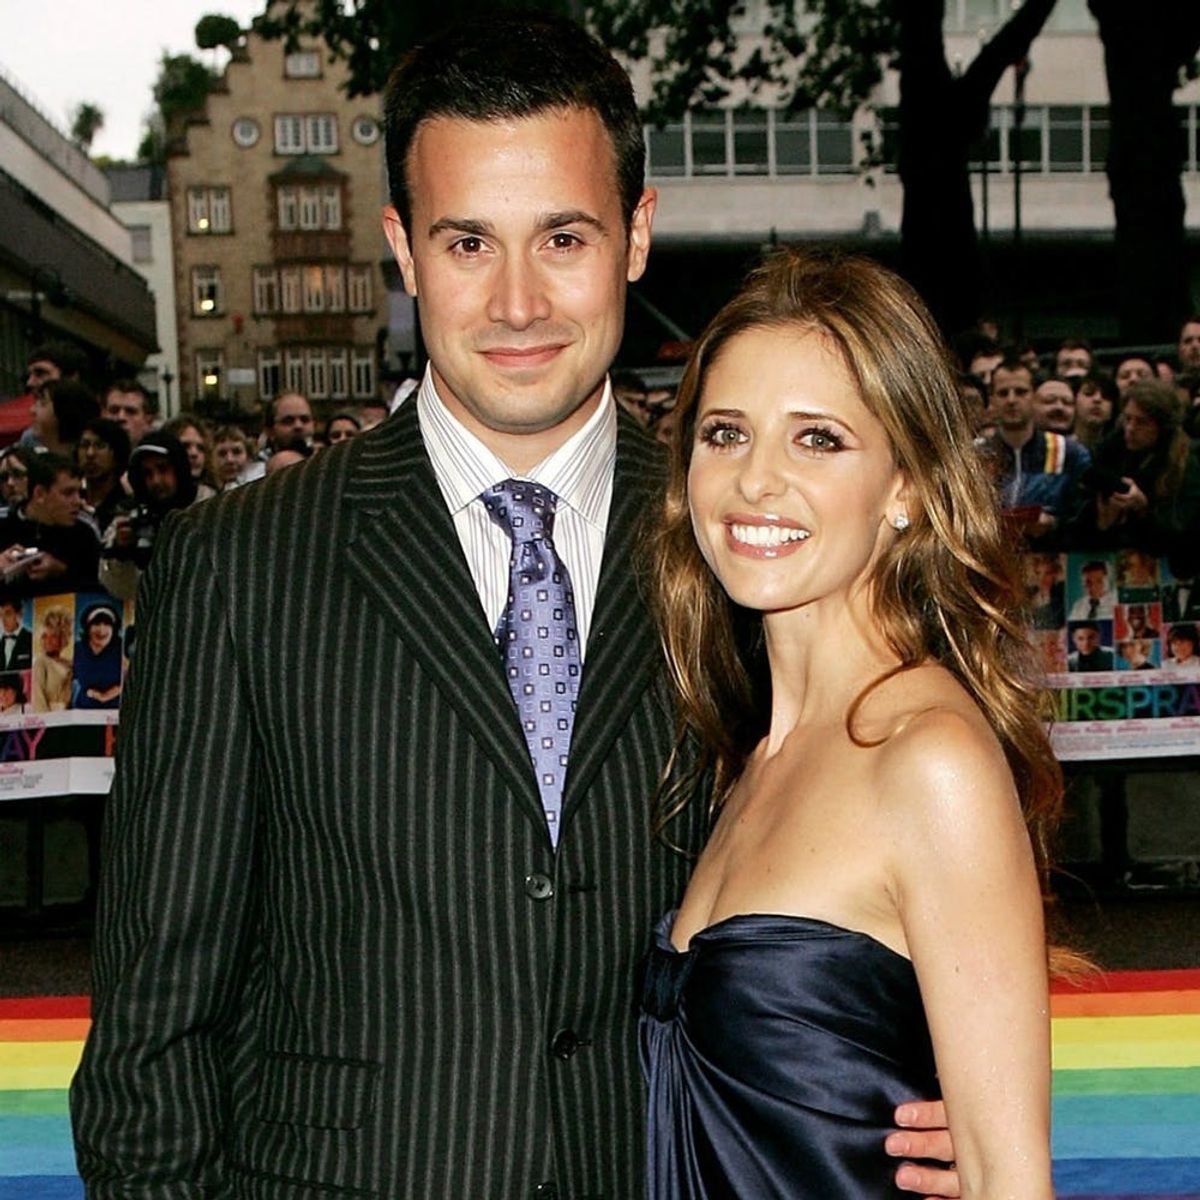 This Pic of Freddie Prinze Jr. With His Kids Might Be the Sweetest Thing You’ll See All Day